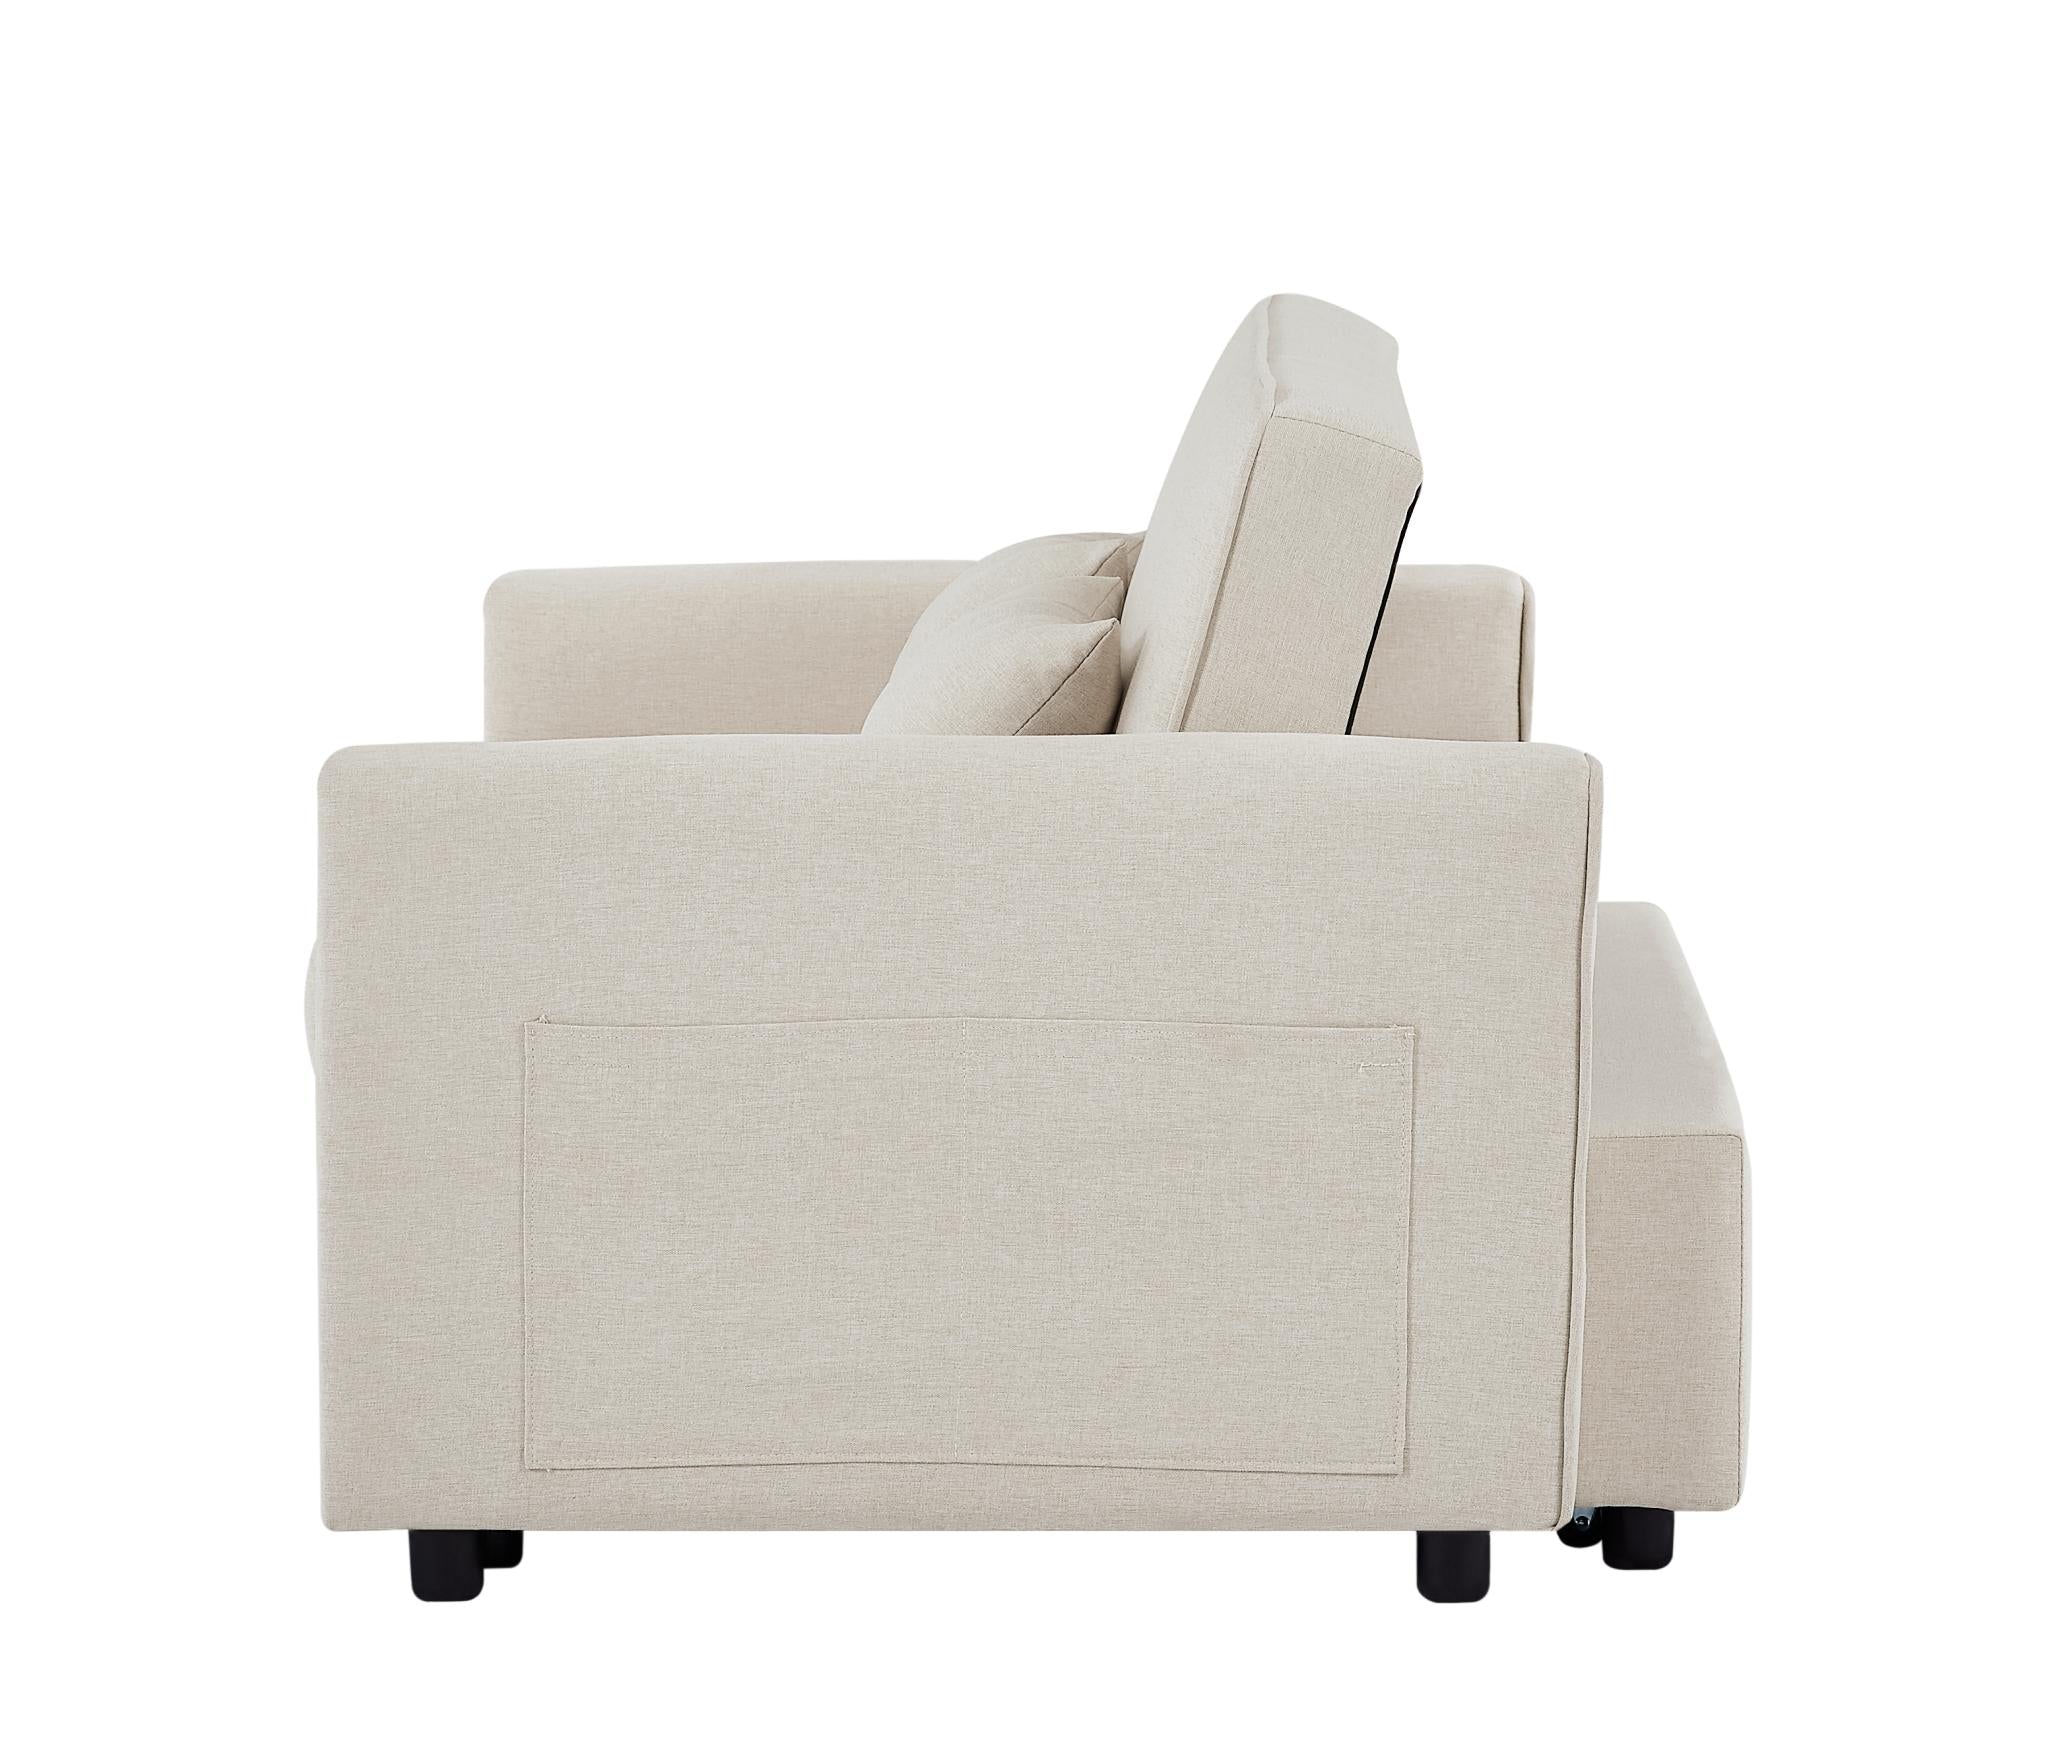 Modern linen double-seater sofa with adjustable backrest, variable sofa bed with 2 lumbar pillows, suitable for a wide range of applications